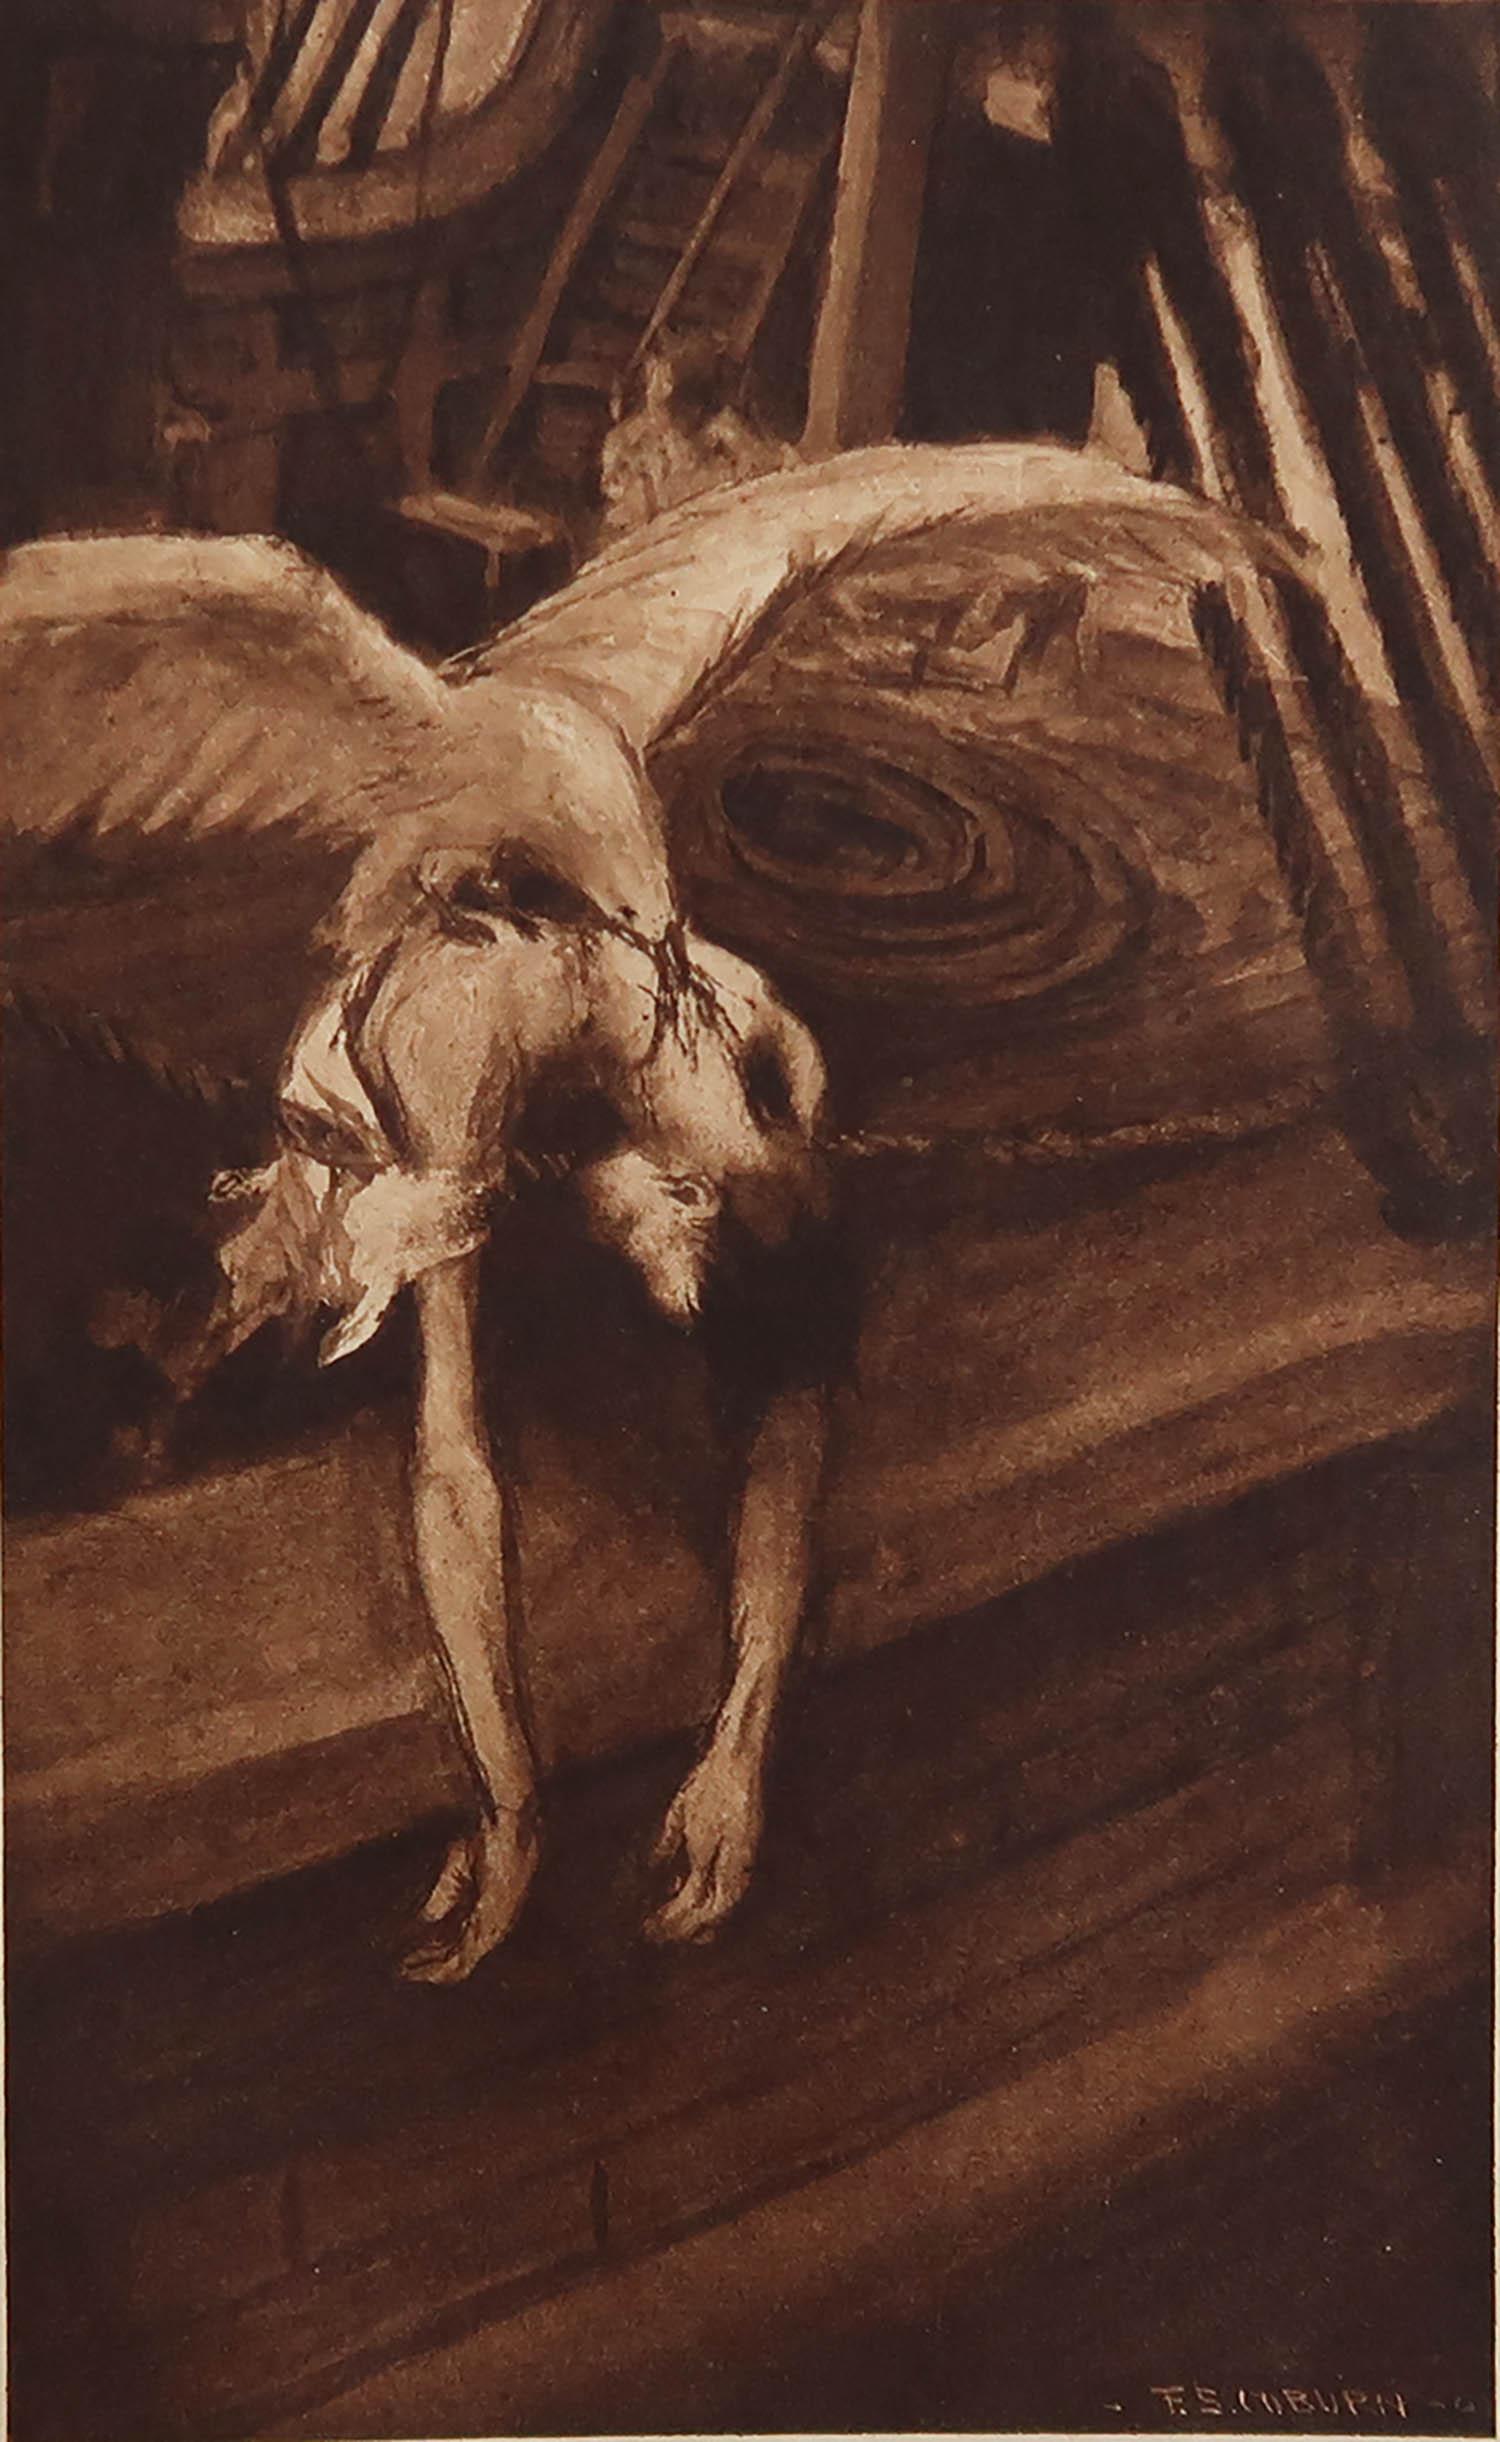 Sensational image by Frederick Simpson Coburn

In the style of one of my favourite artists, Goya

Photogravure

Limited edition of 300. This is No. 84

From the complete works of Edgar Allen Poe

Published by Putnam, New York. 1902

On